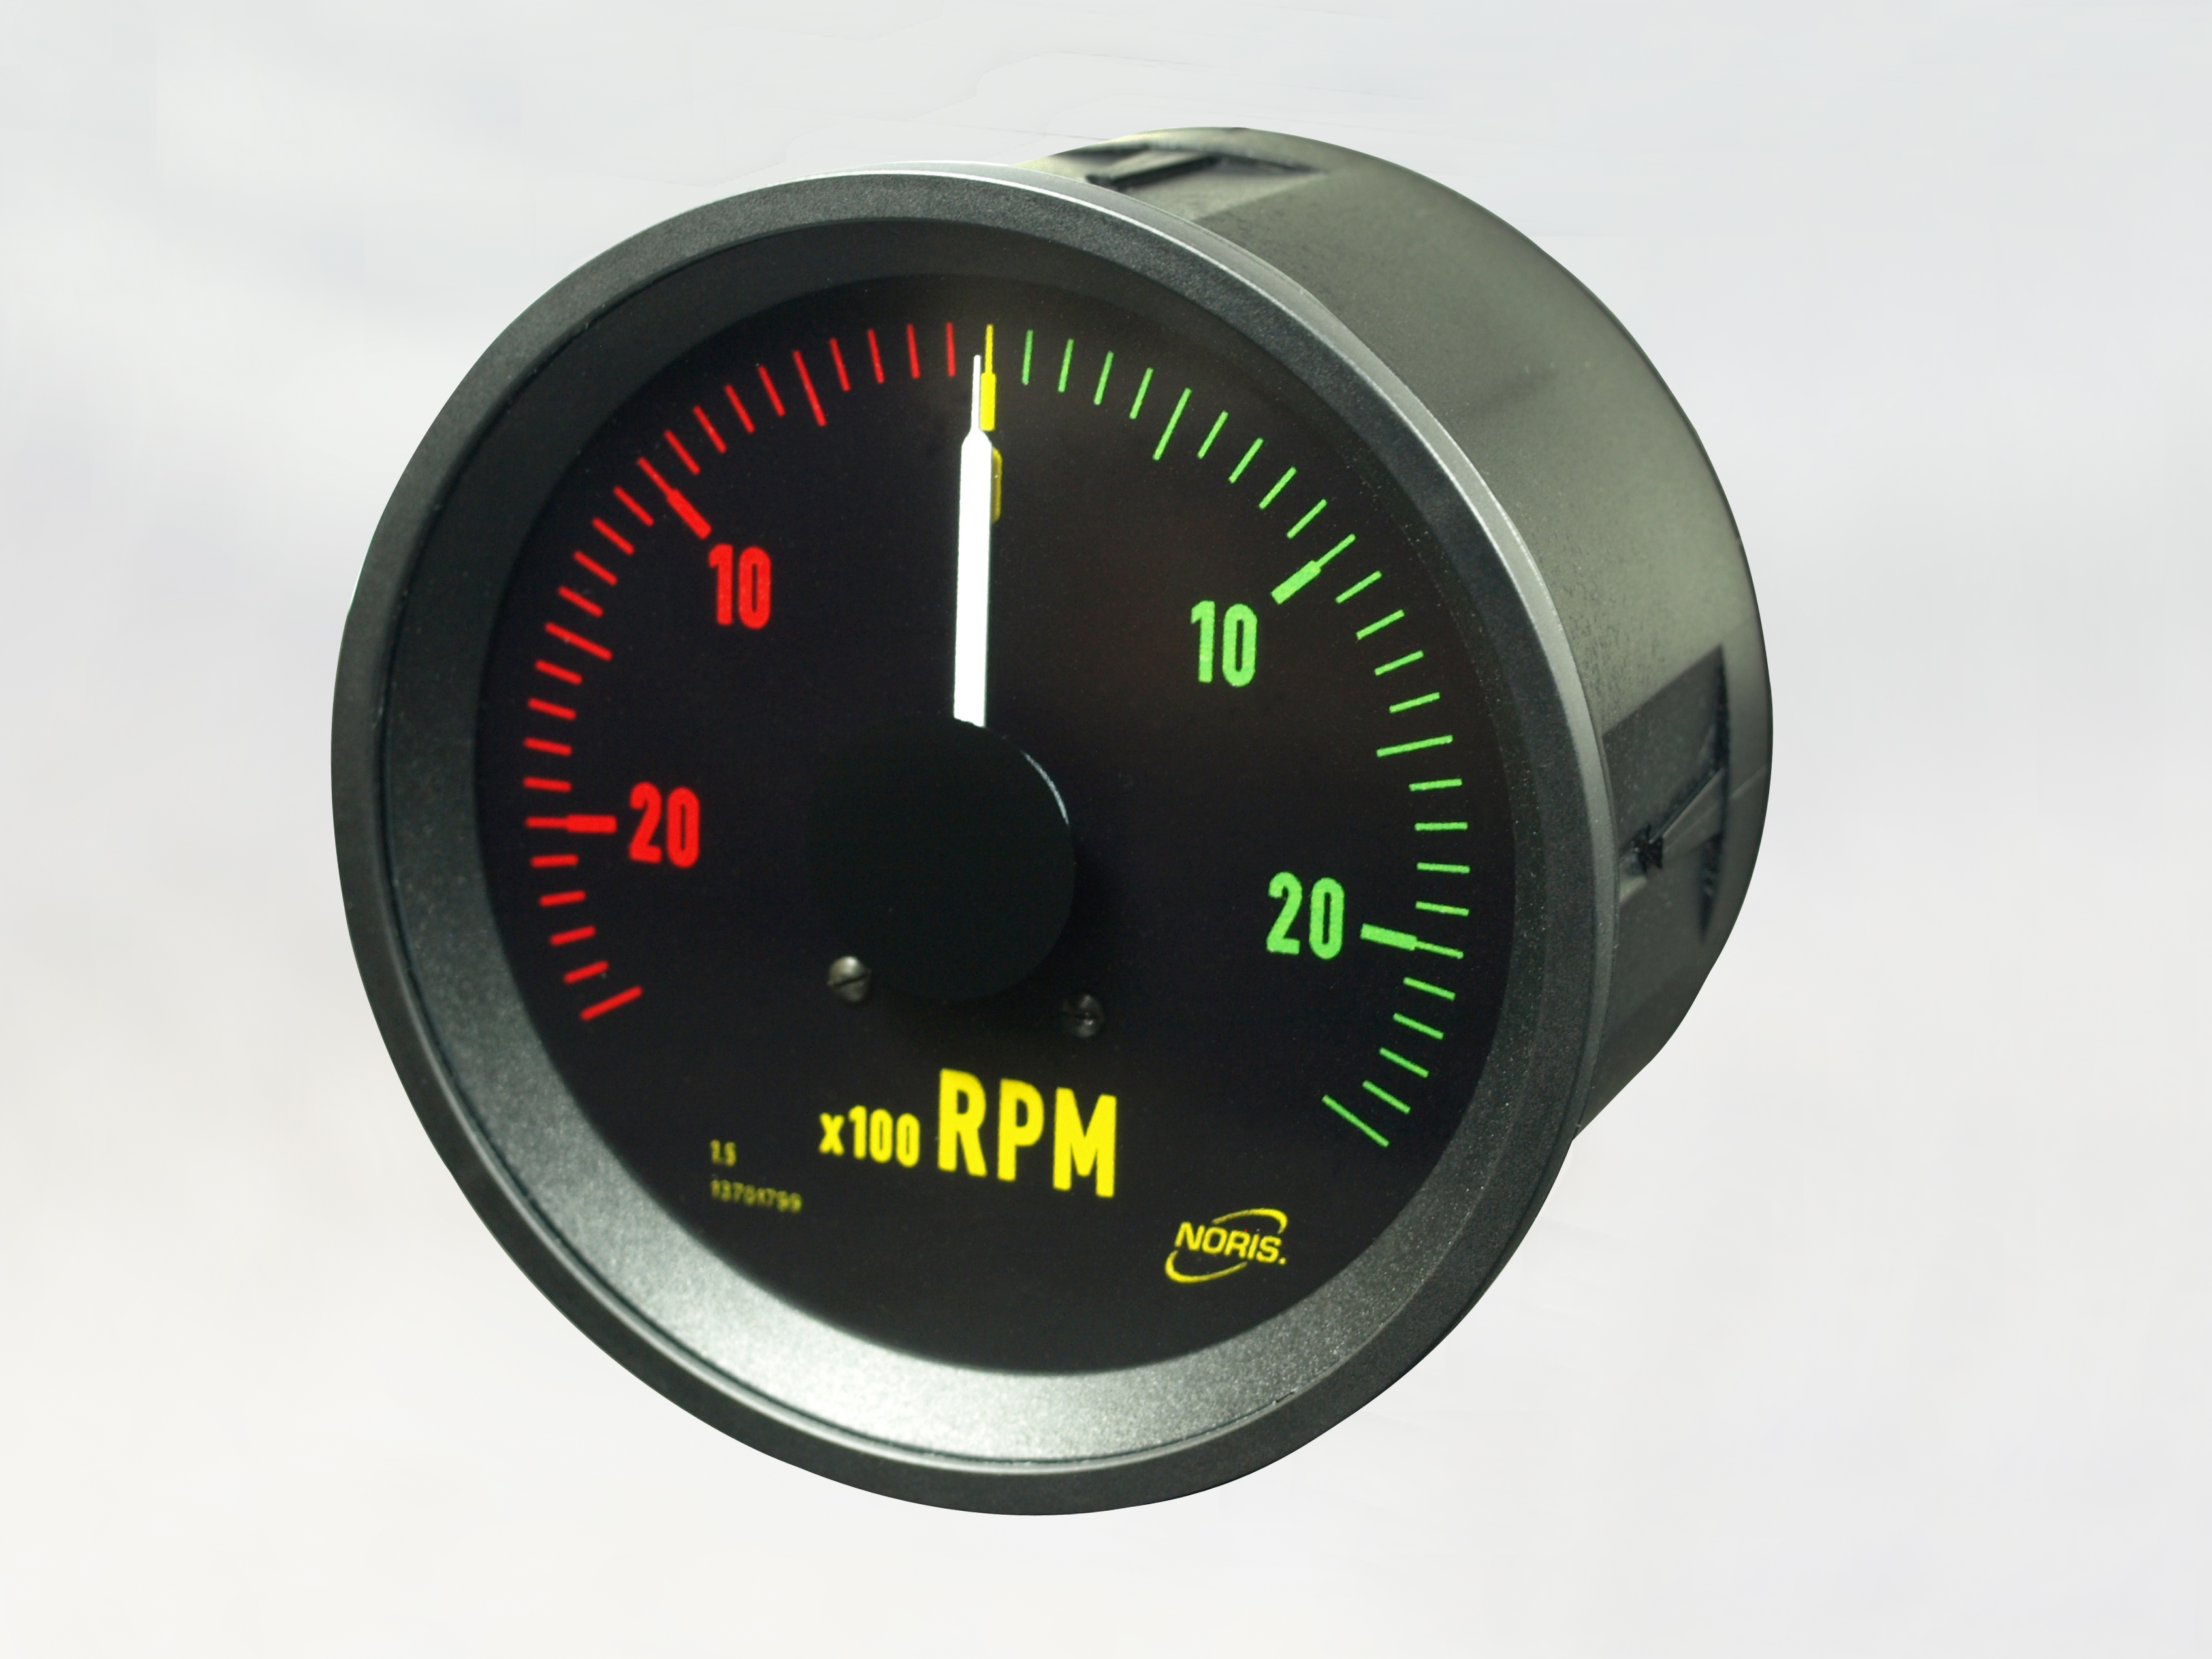 The image shows a round analogue display with a black scale with a zero position in the middle. The digits on the left-hand scale are red, the digits on the right-hand scale are green. The display measures the engine speed.